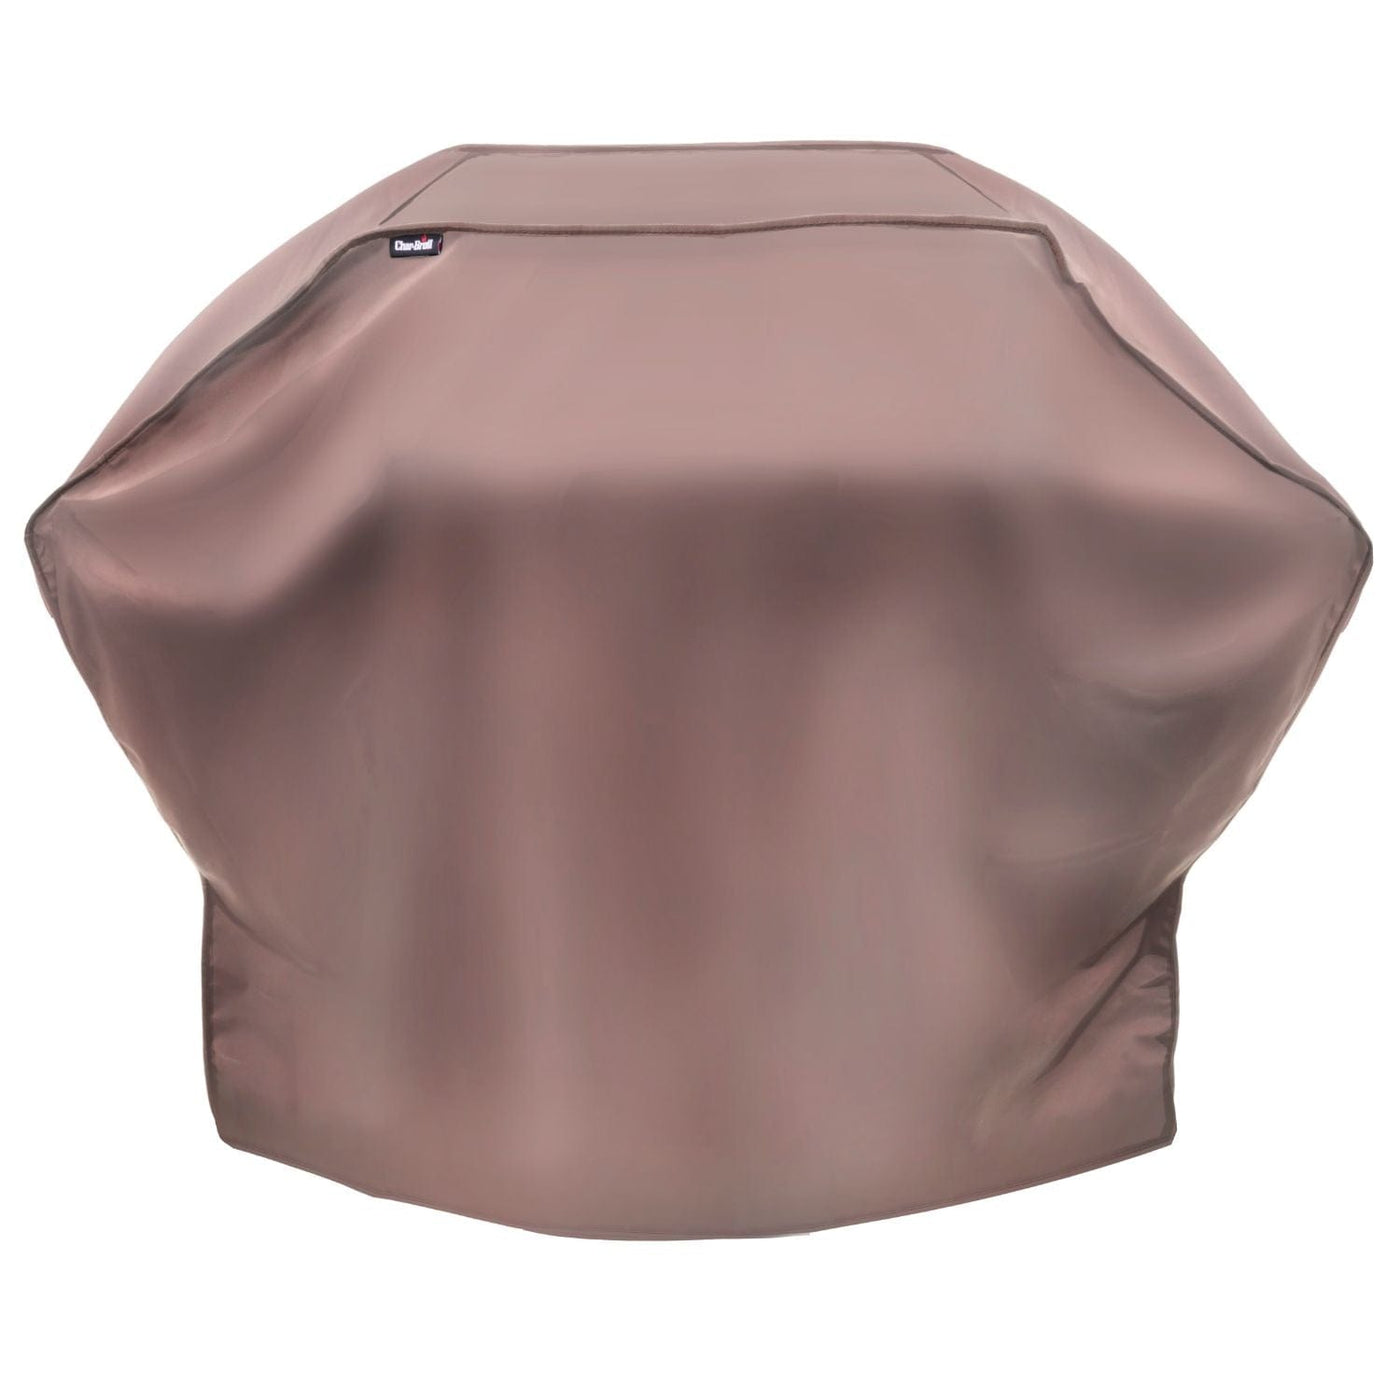 Char-Broil Char-Broil Large 3-4 Burner Performance Tan Grill Cover Camping And Outdoor